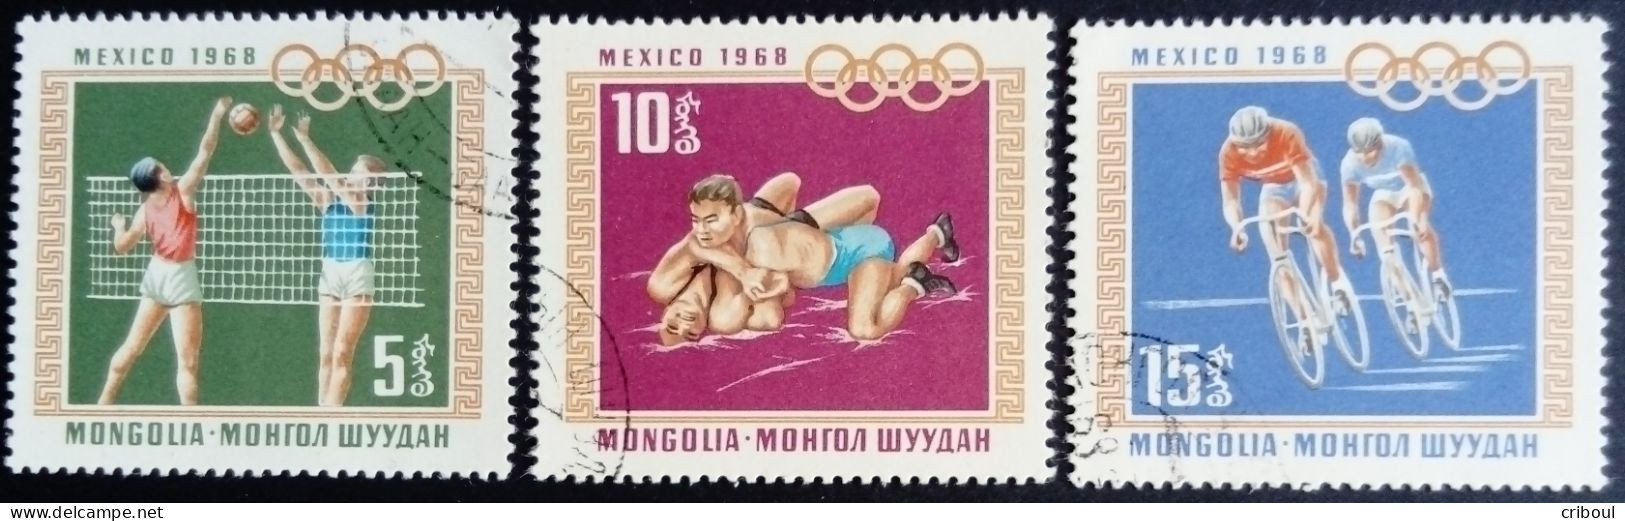 Mongolie Mongolia 1968 Sport Jeux Olympiques Olympic Games Volleyball Lutte Cyclisme Yvert 452 453 454 O Used - Mongolie